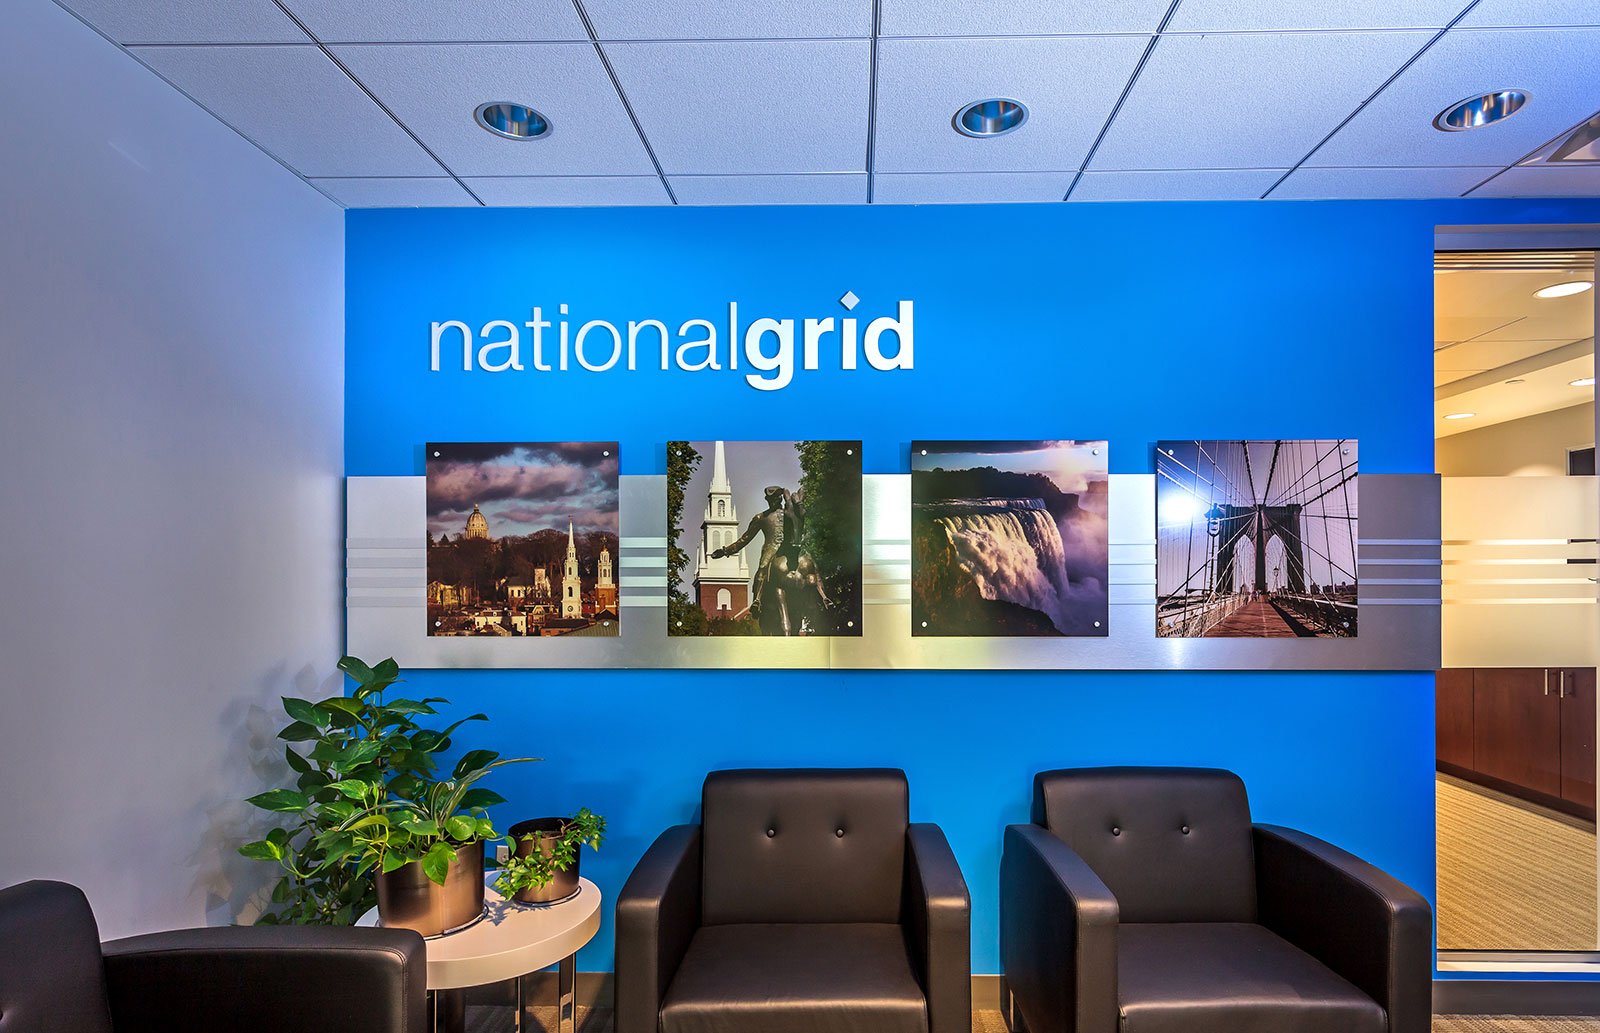 Commercial Brand Environment, National Grid Corporate Lobby, Graphic Design